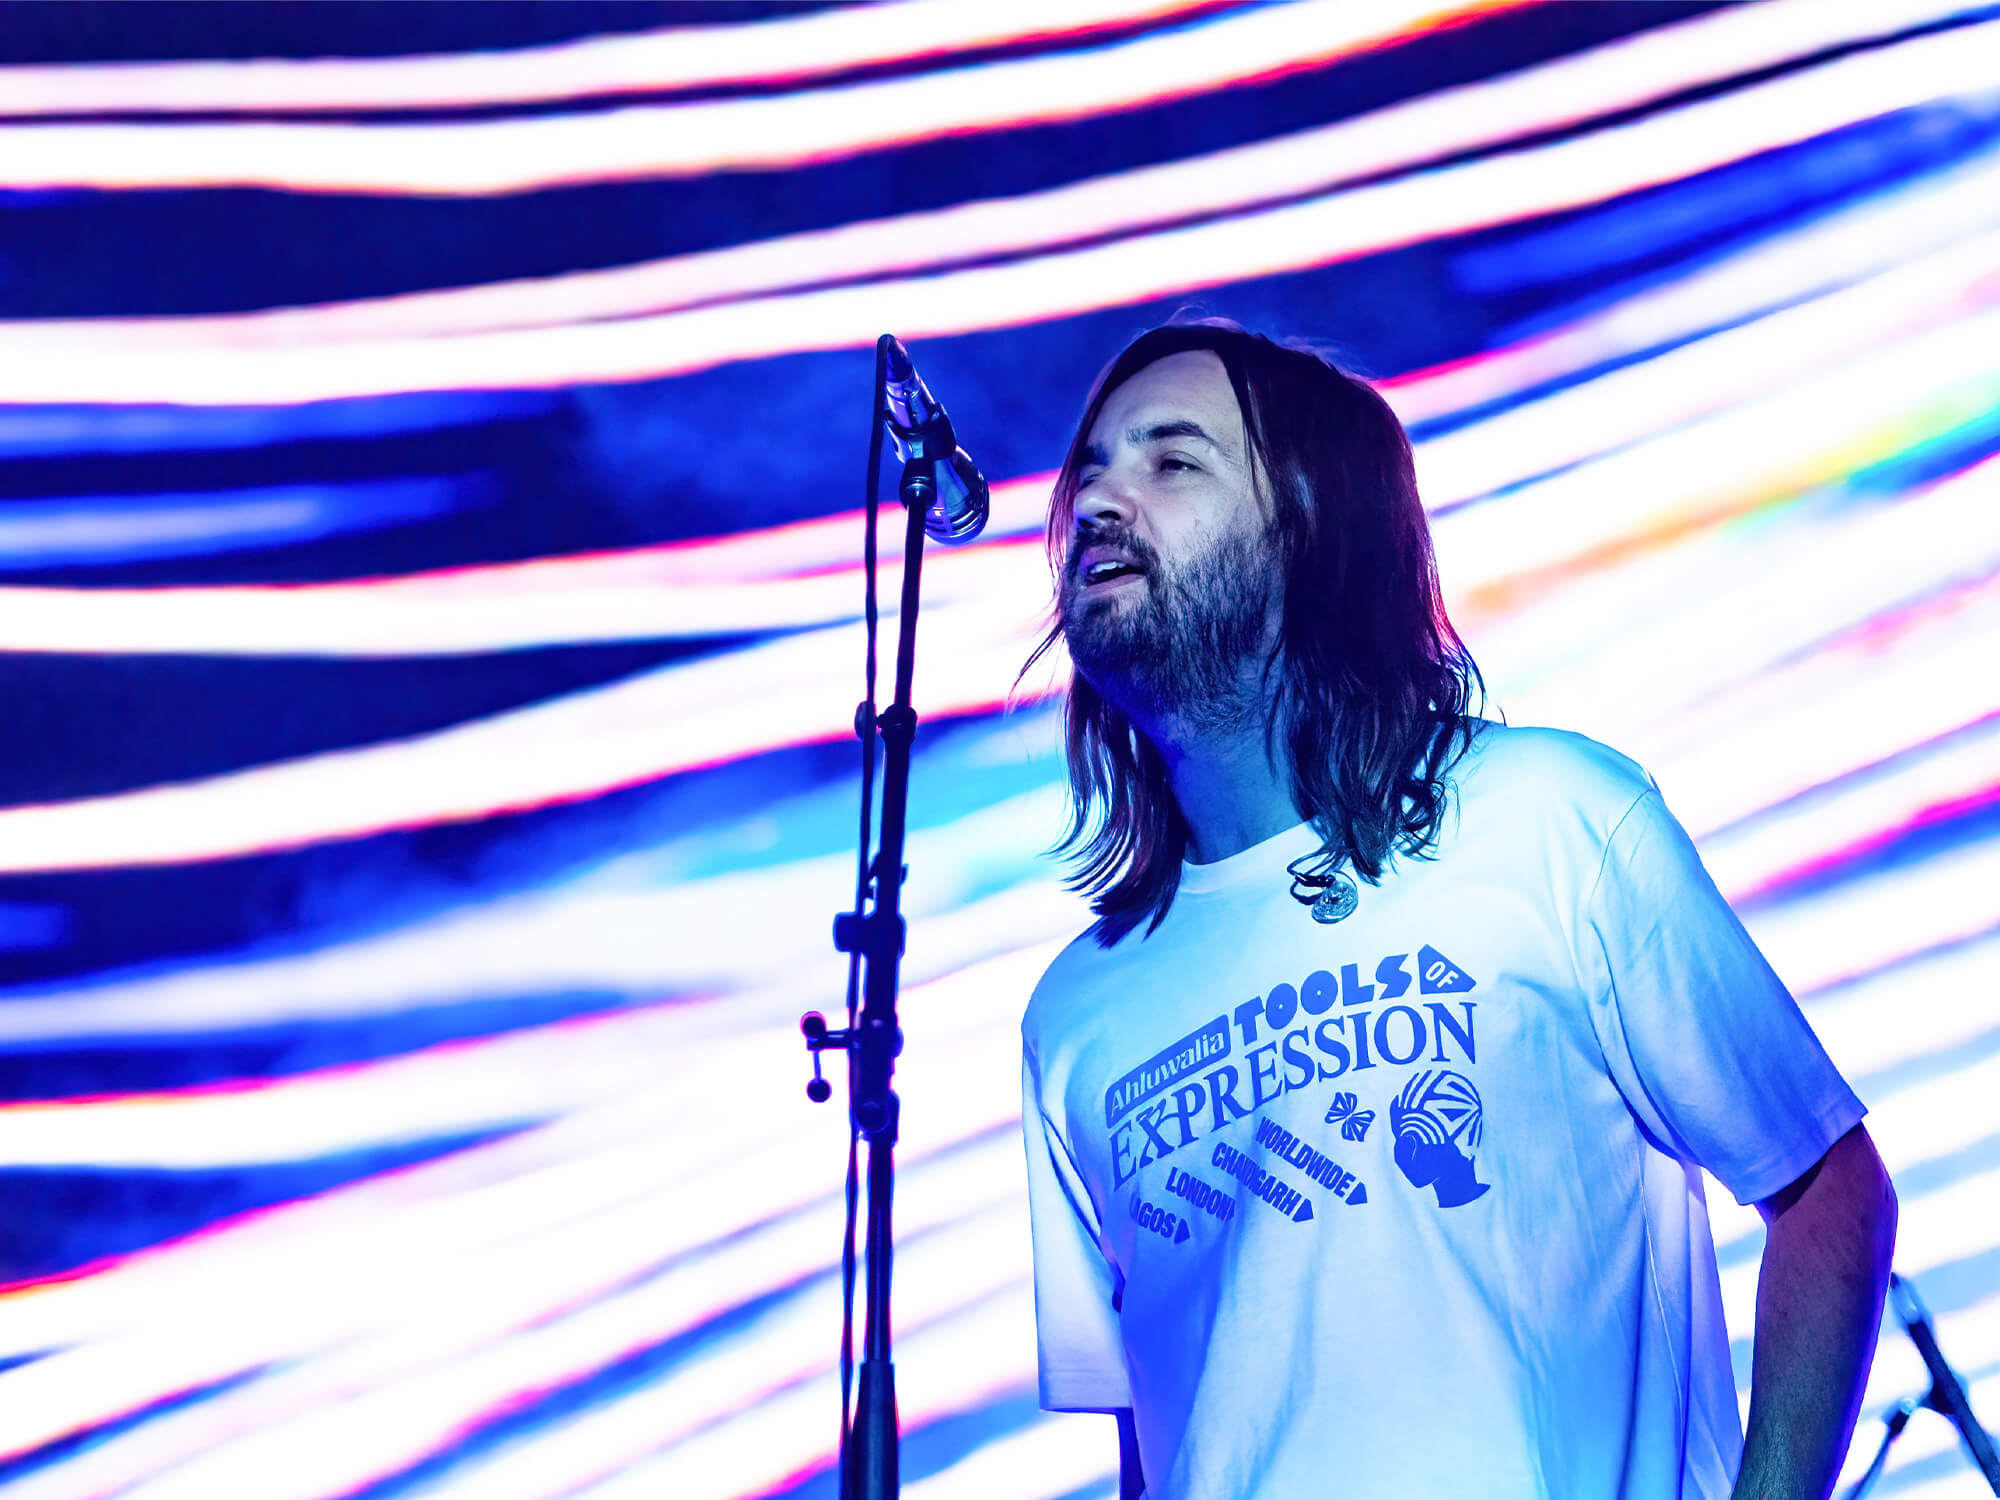 Tame Impala (Kevin Parker) on stage singing into a mic.